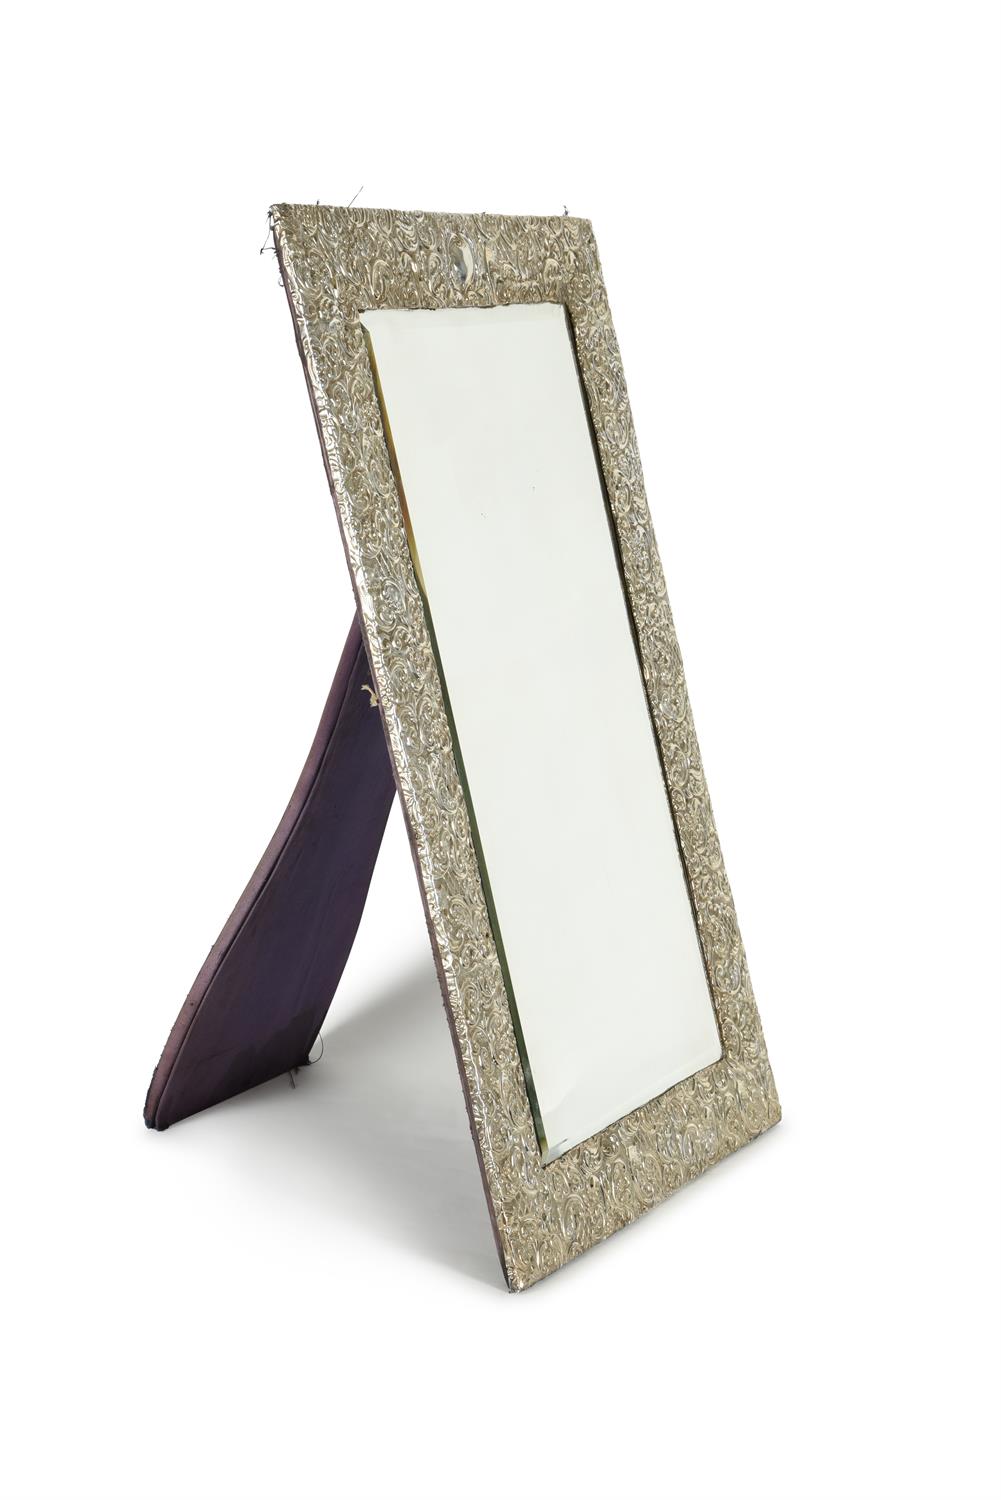 An Edwardian silver large rectangular wall or easel dressing mirror by A. & J. Zimmerman